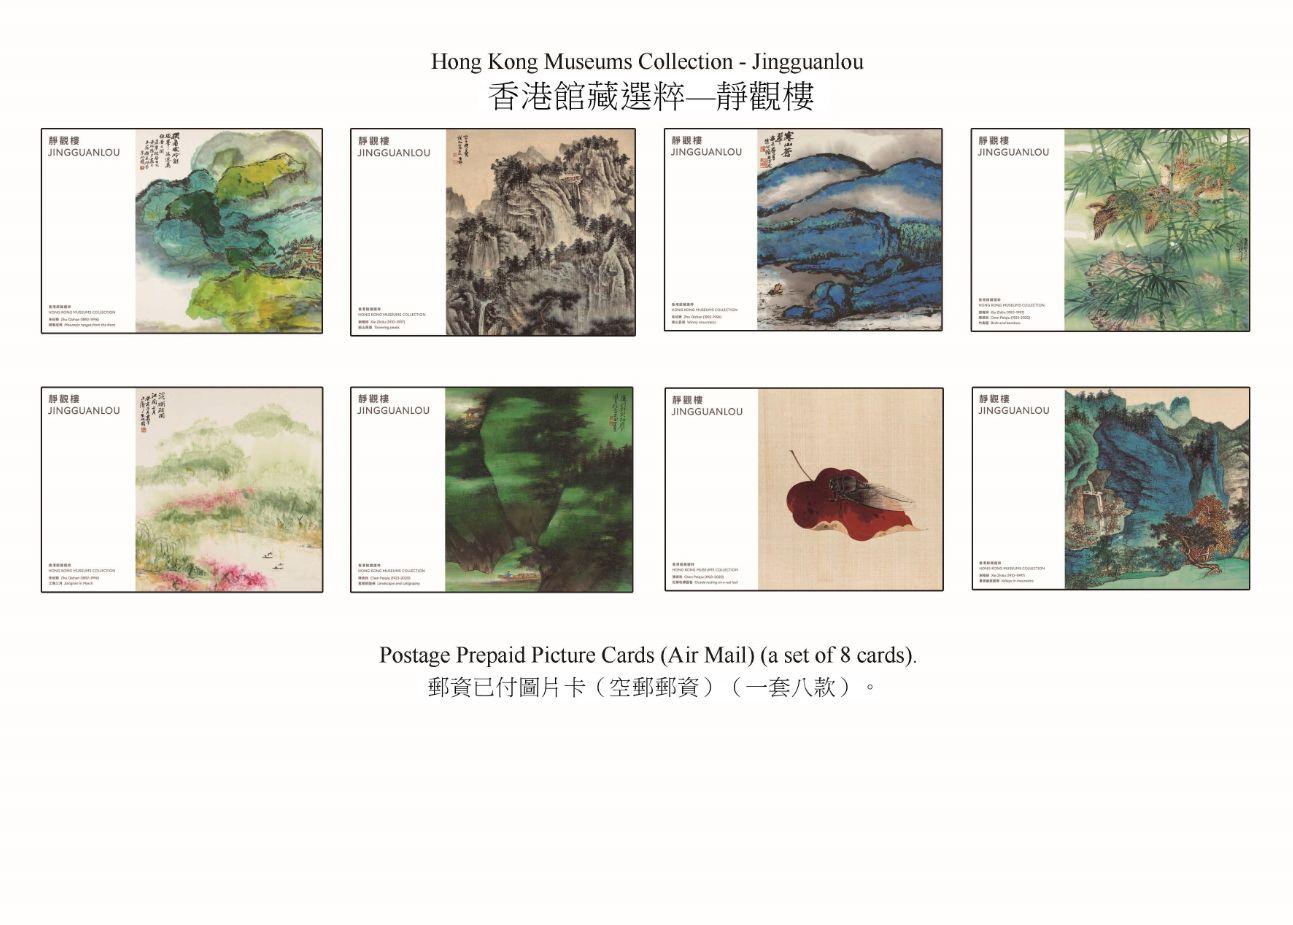 Hongkong Post will launch a special stamp issue and associated philatelic products on the theme of "Hong Kong Museums Collection - Jingguanlou" on March 23 (Thursday). Photo shows the postage prepaid picture cards (air mail).

